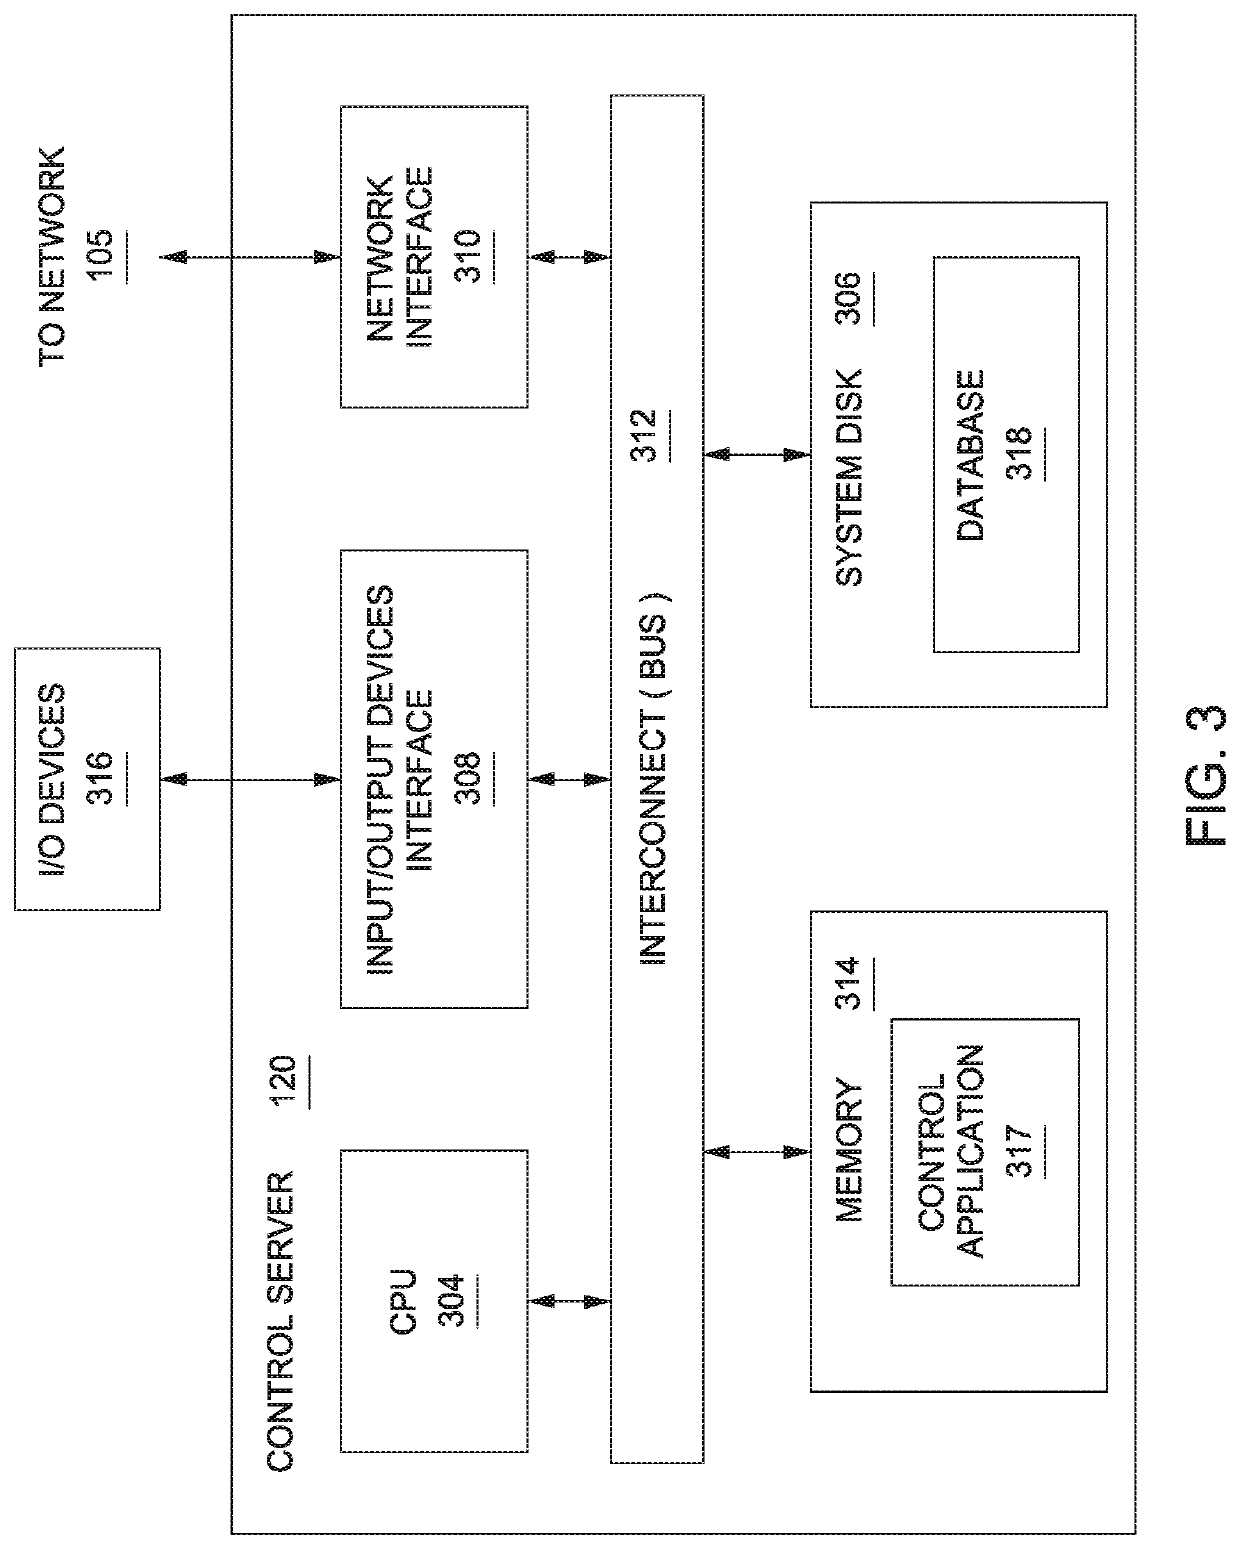 Determining the failure resiliency of a service in a distributed computing system